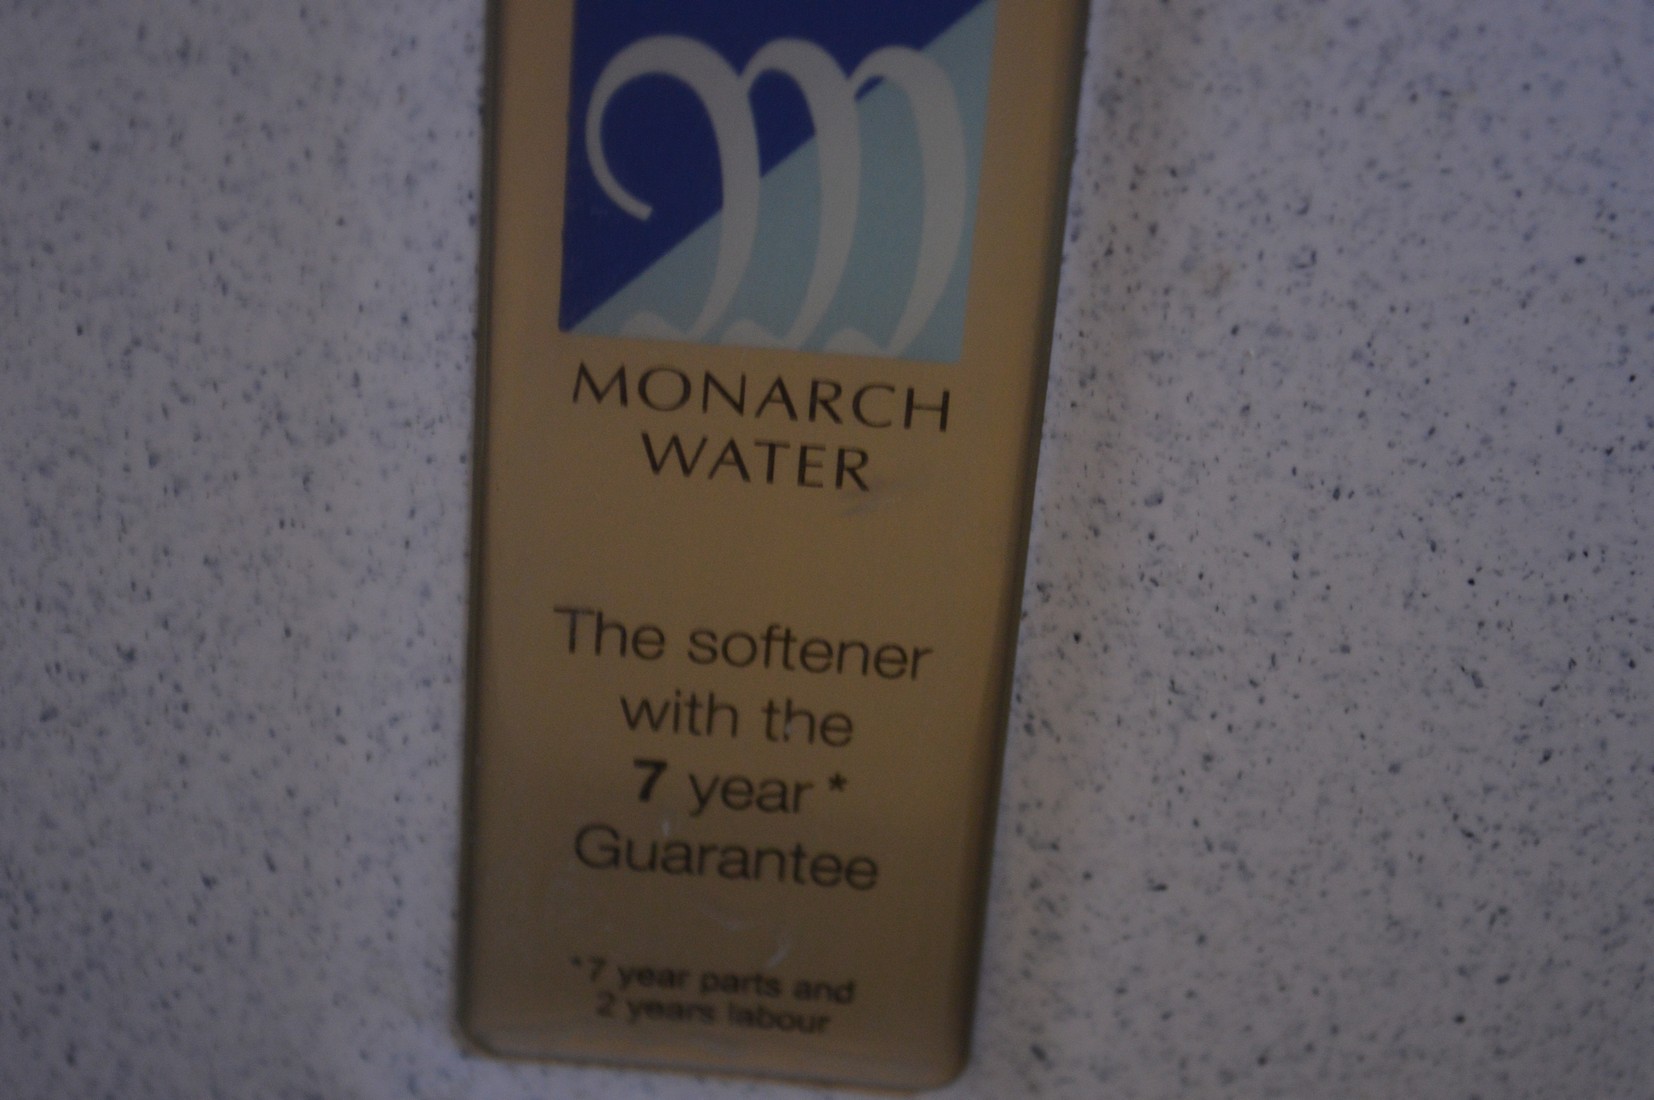 A Monarch water softener. - Image 2 of 2